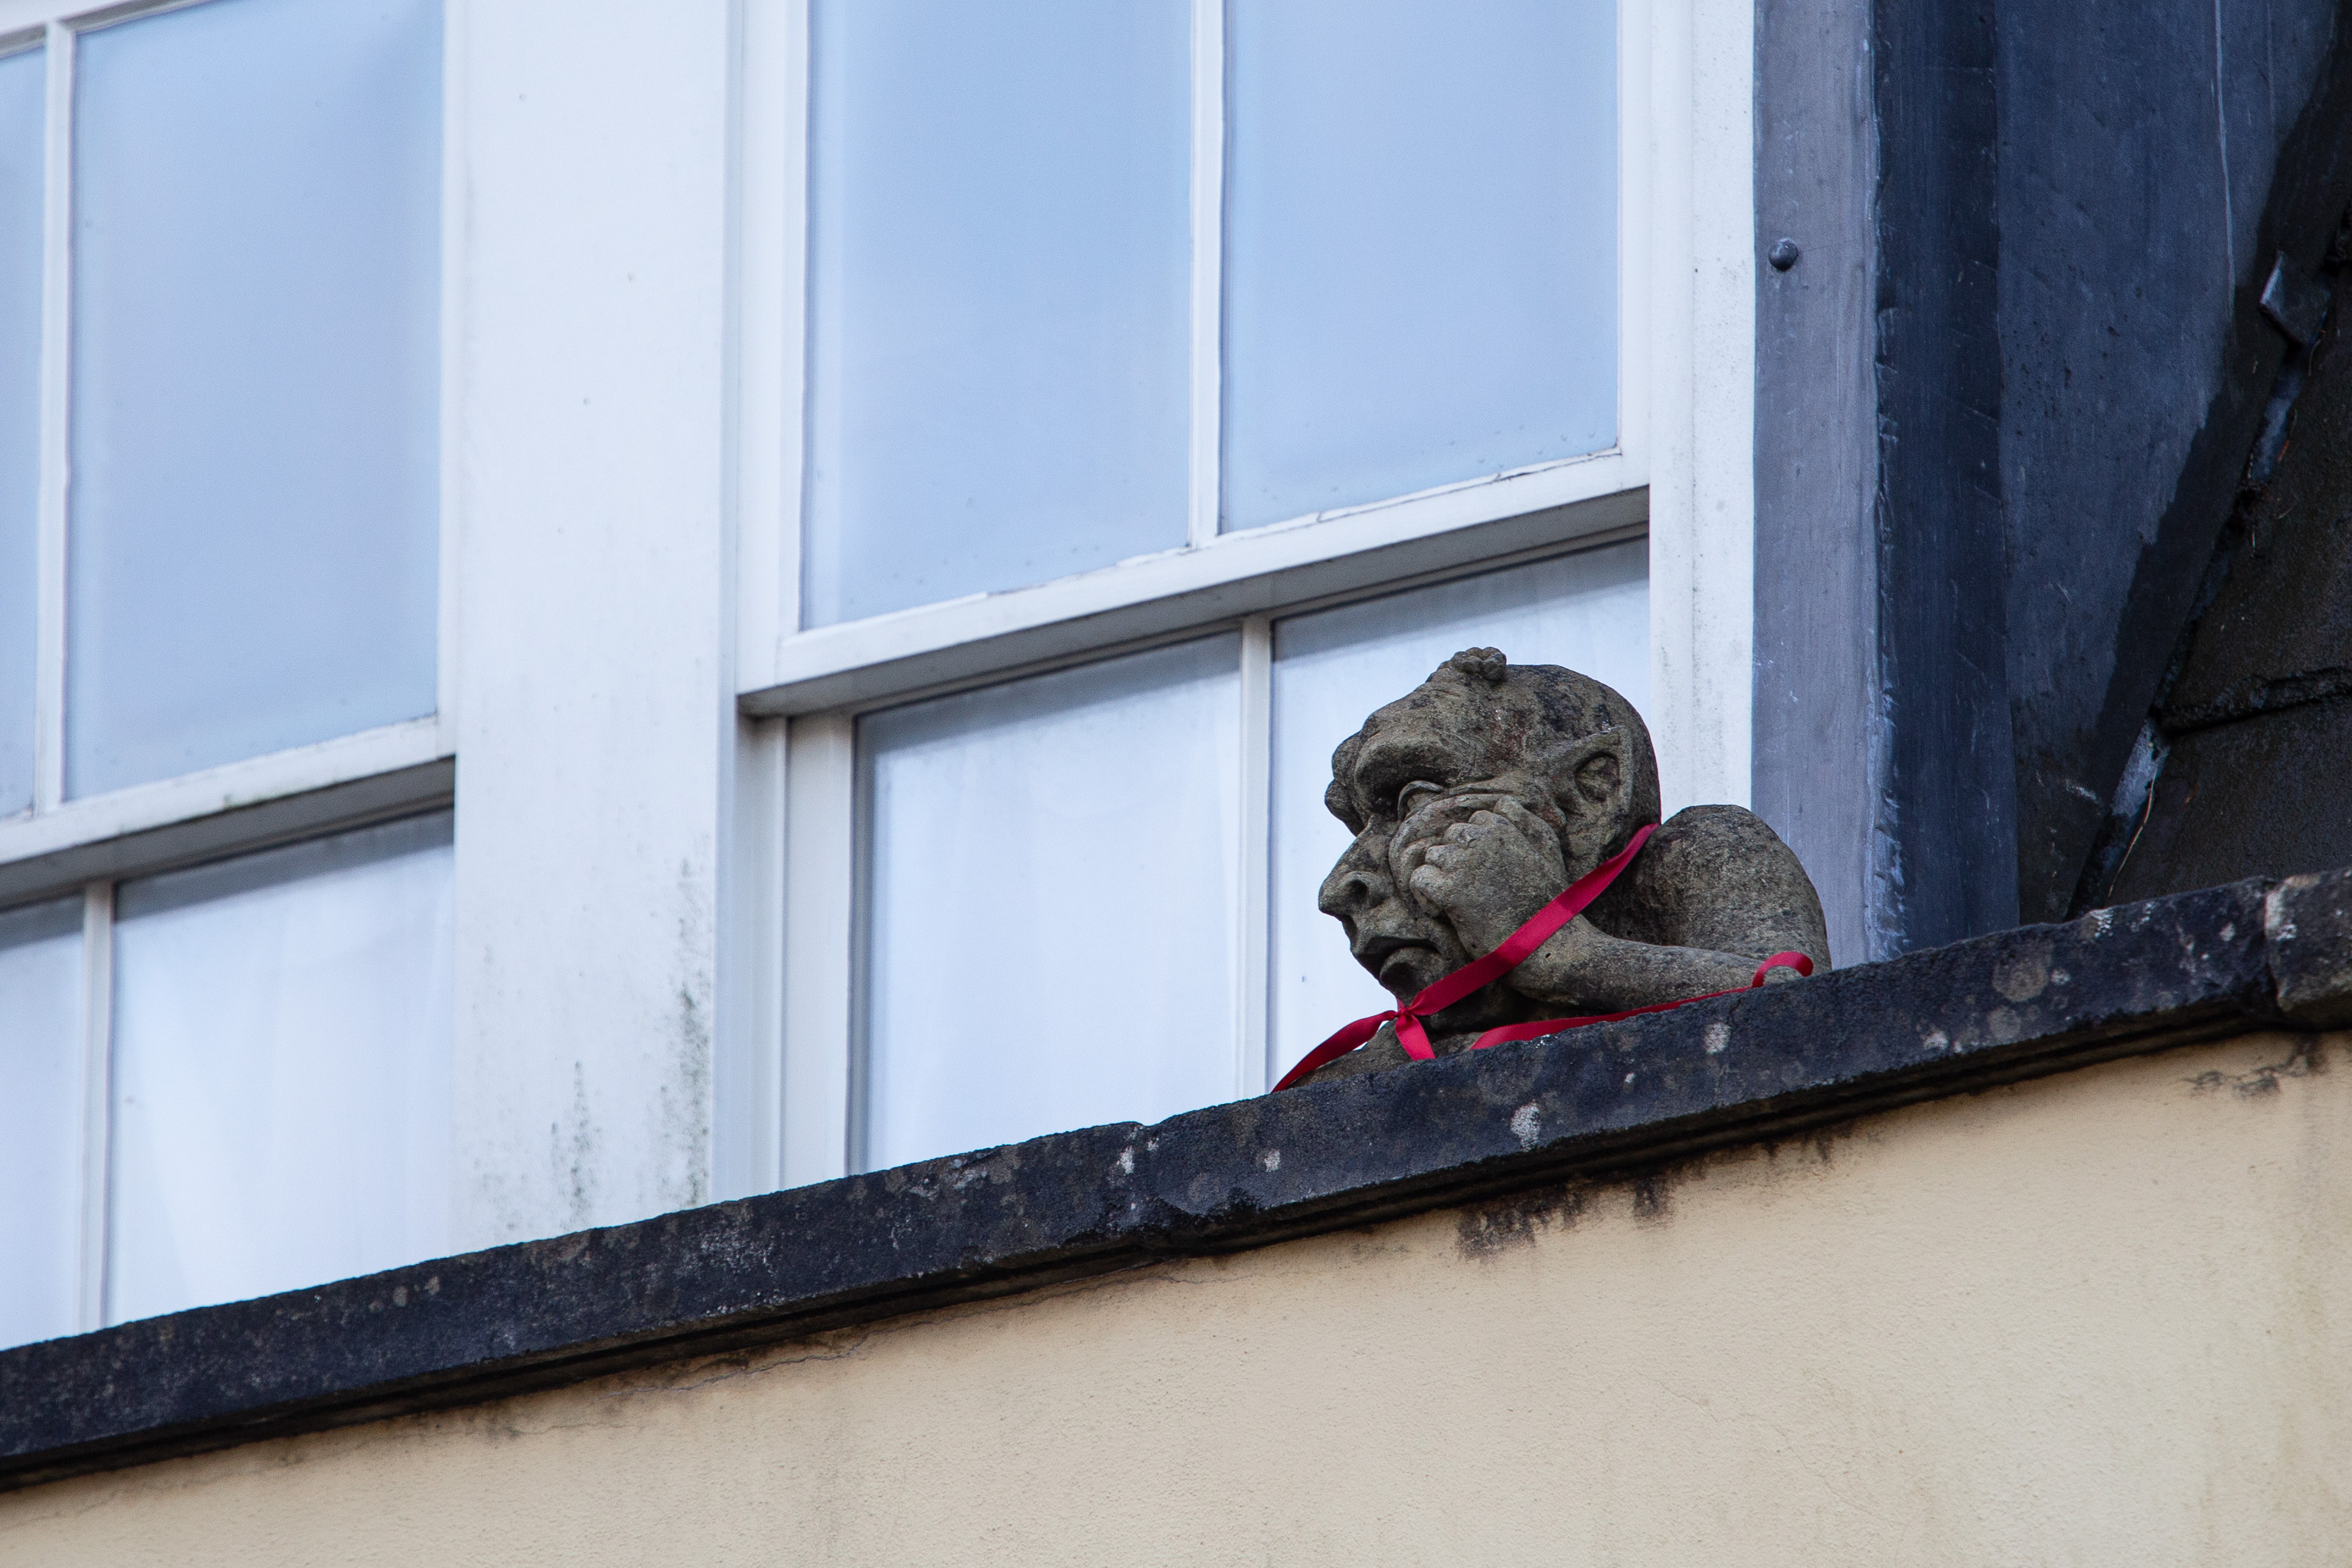 Gargoyle
The third in a trio of unusual faces, this fella's been catching my eye from a high point on Princes Buildings for years.
